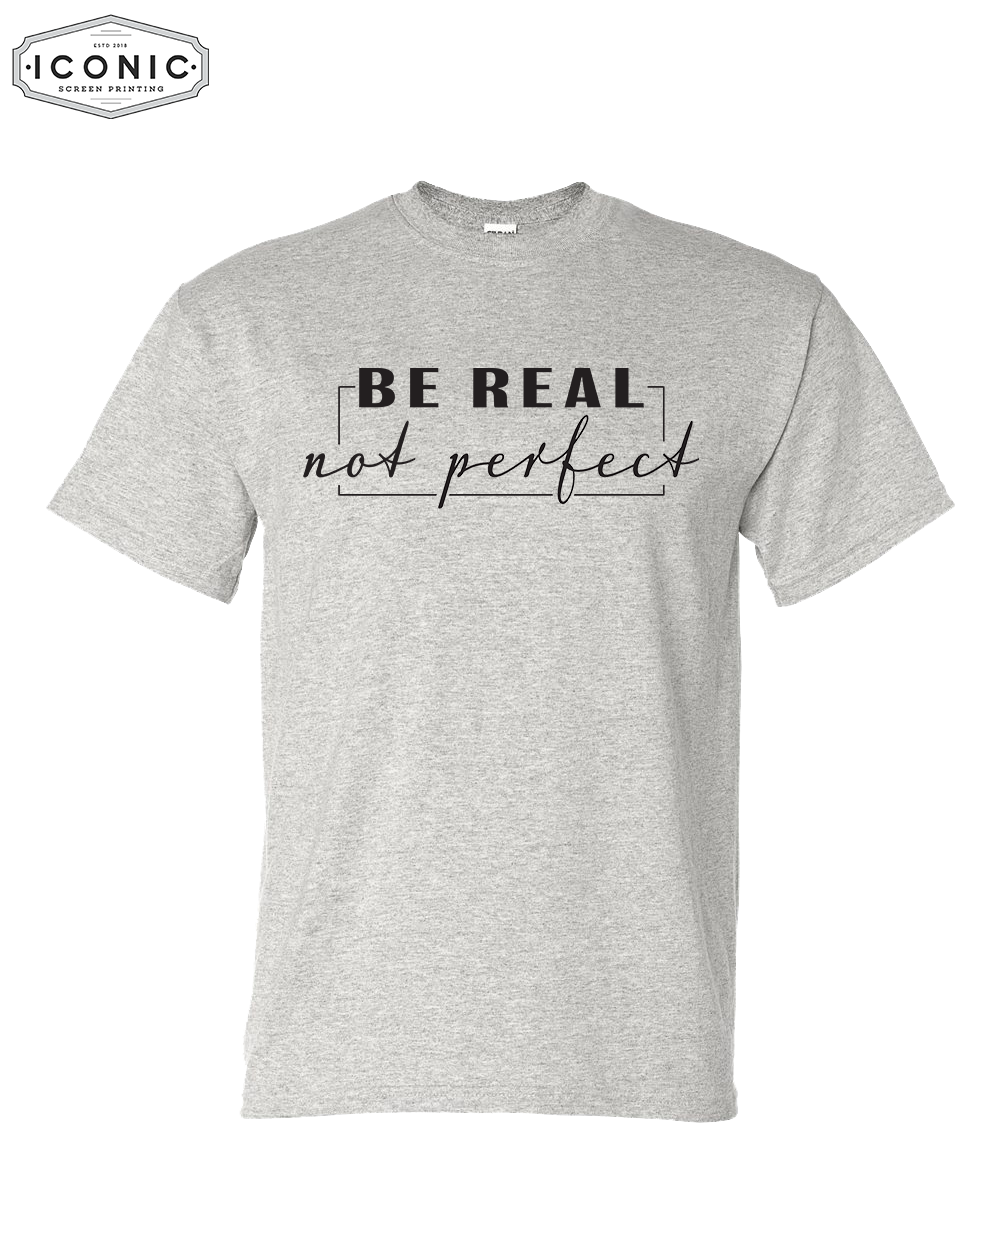 Be Real, Not Perfect - DryBlend T-shirt